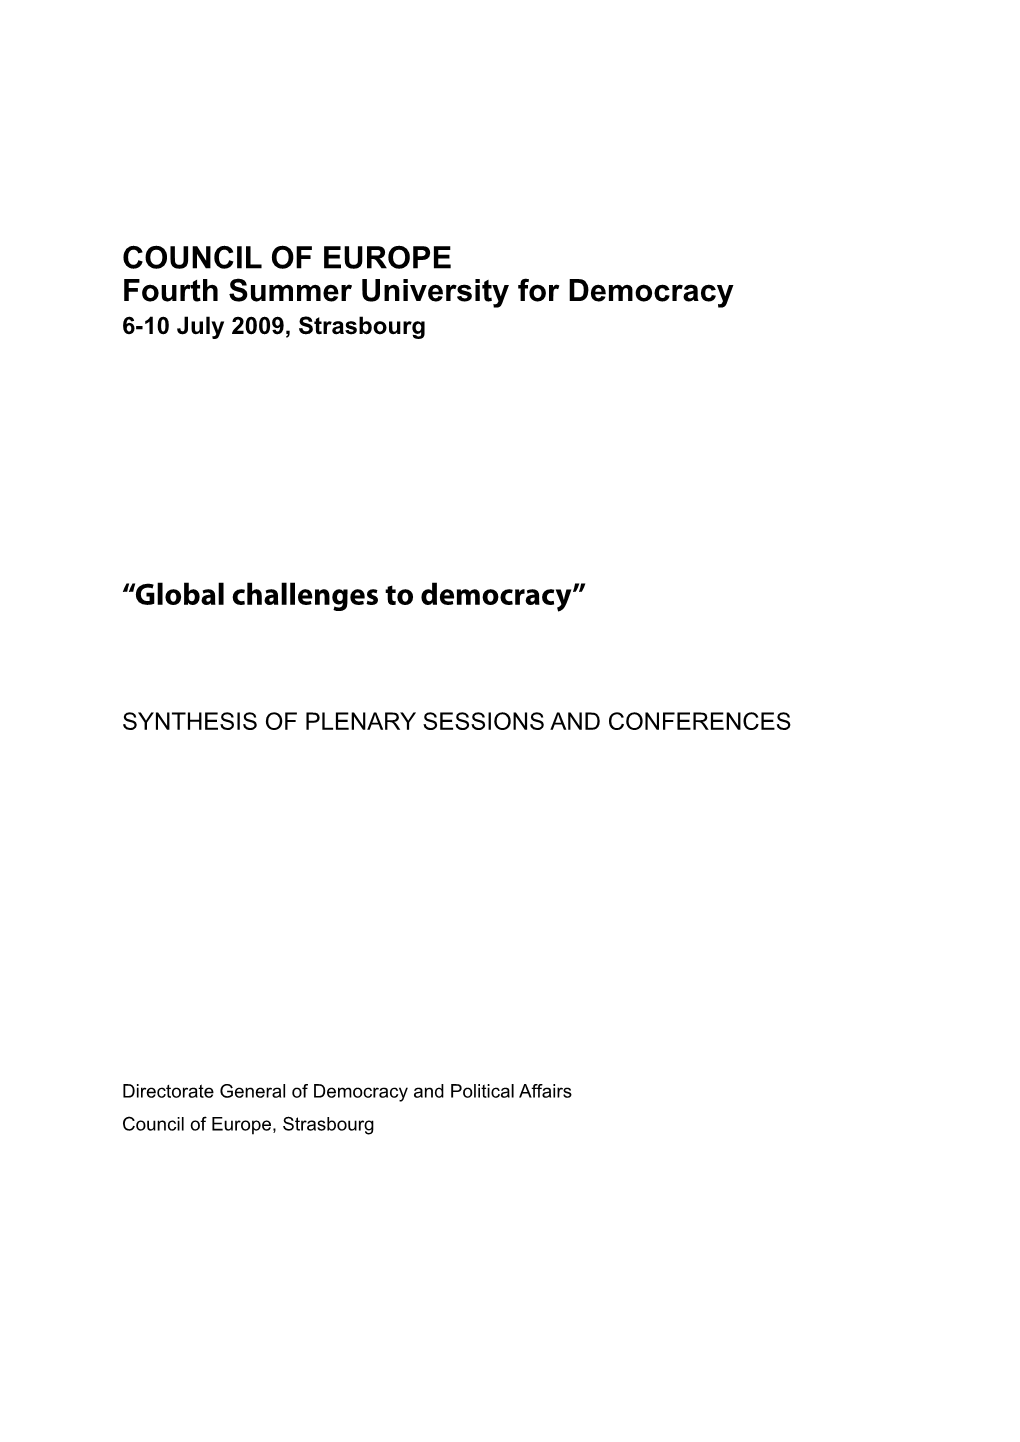 Global Challenges to Democracy”